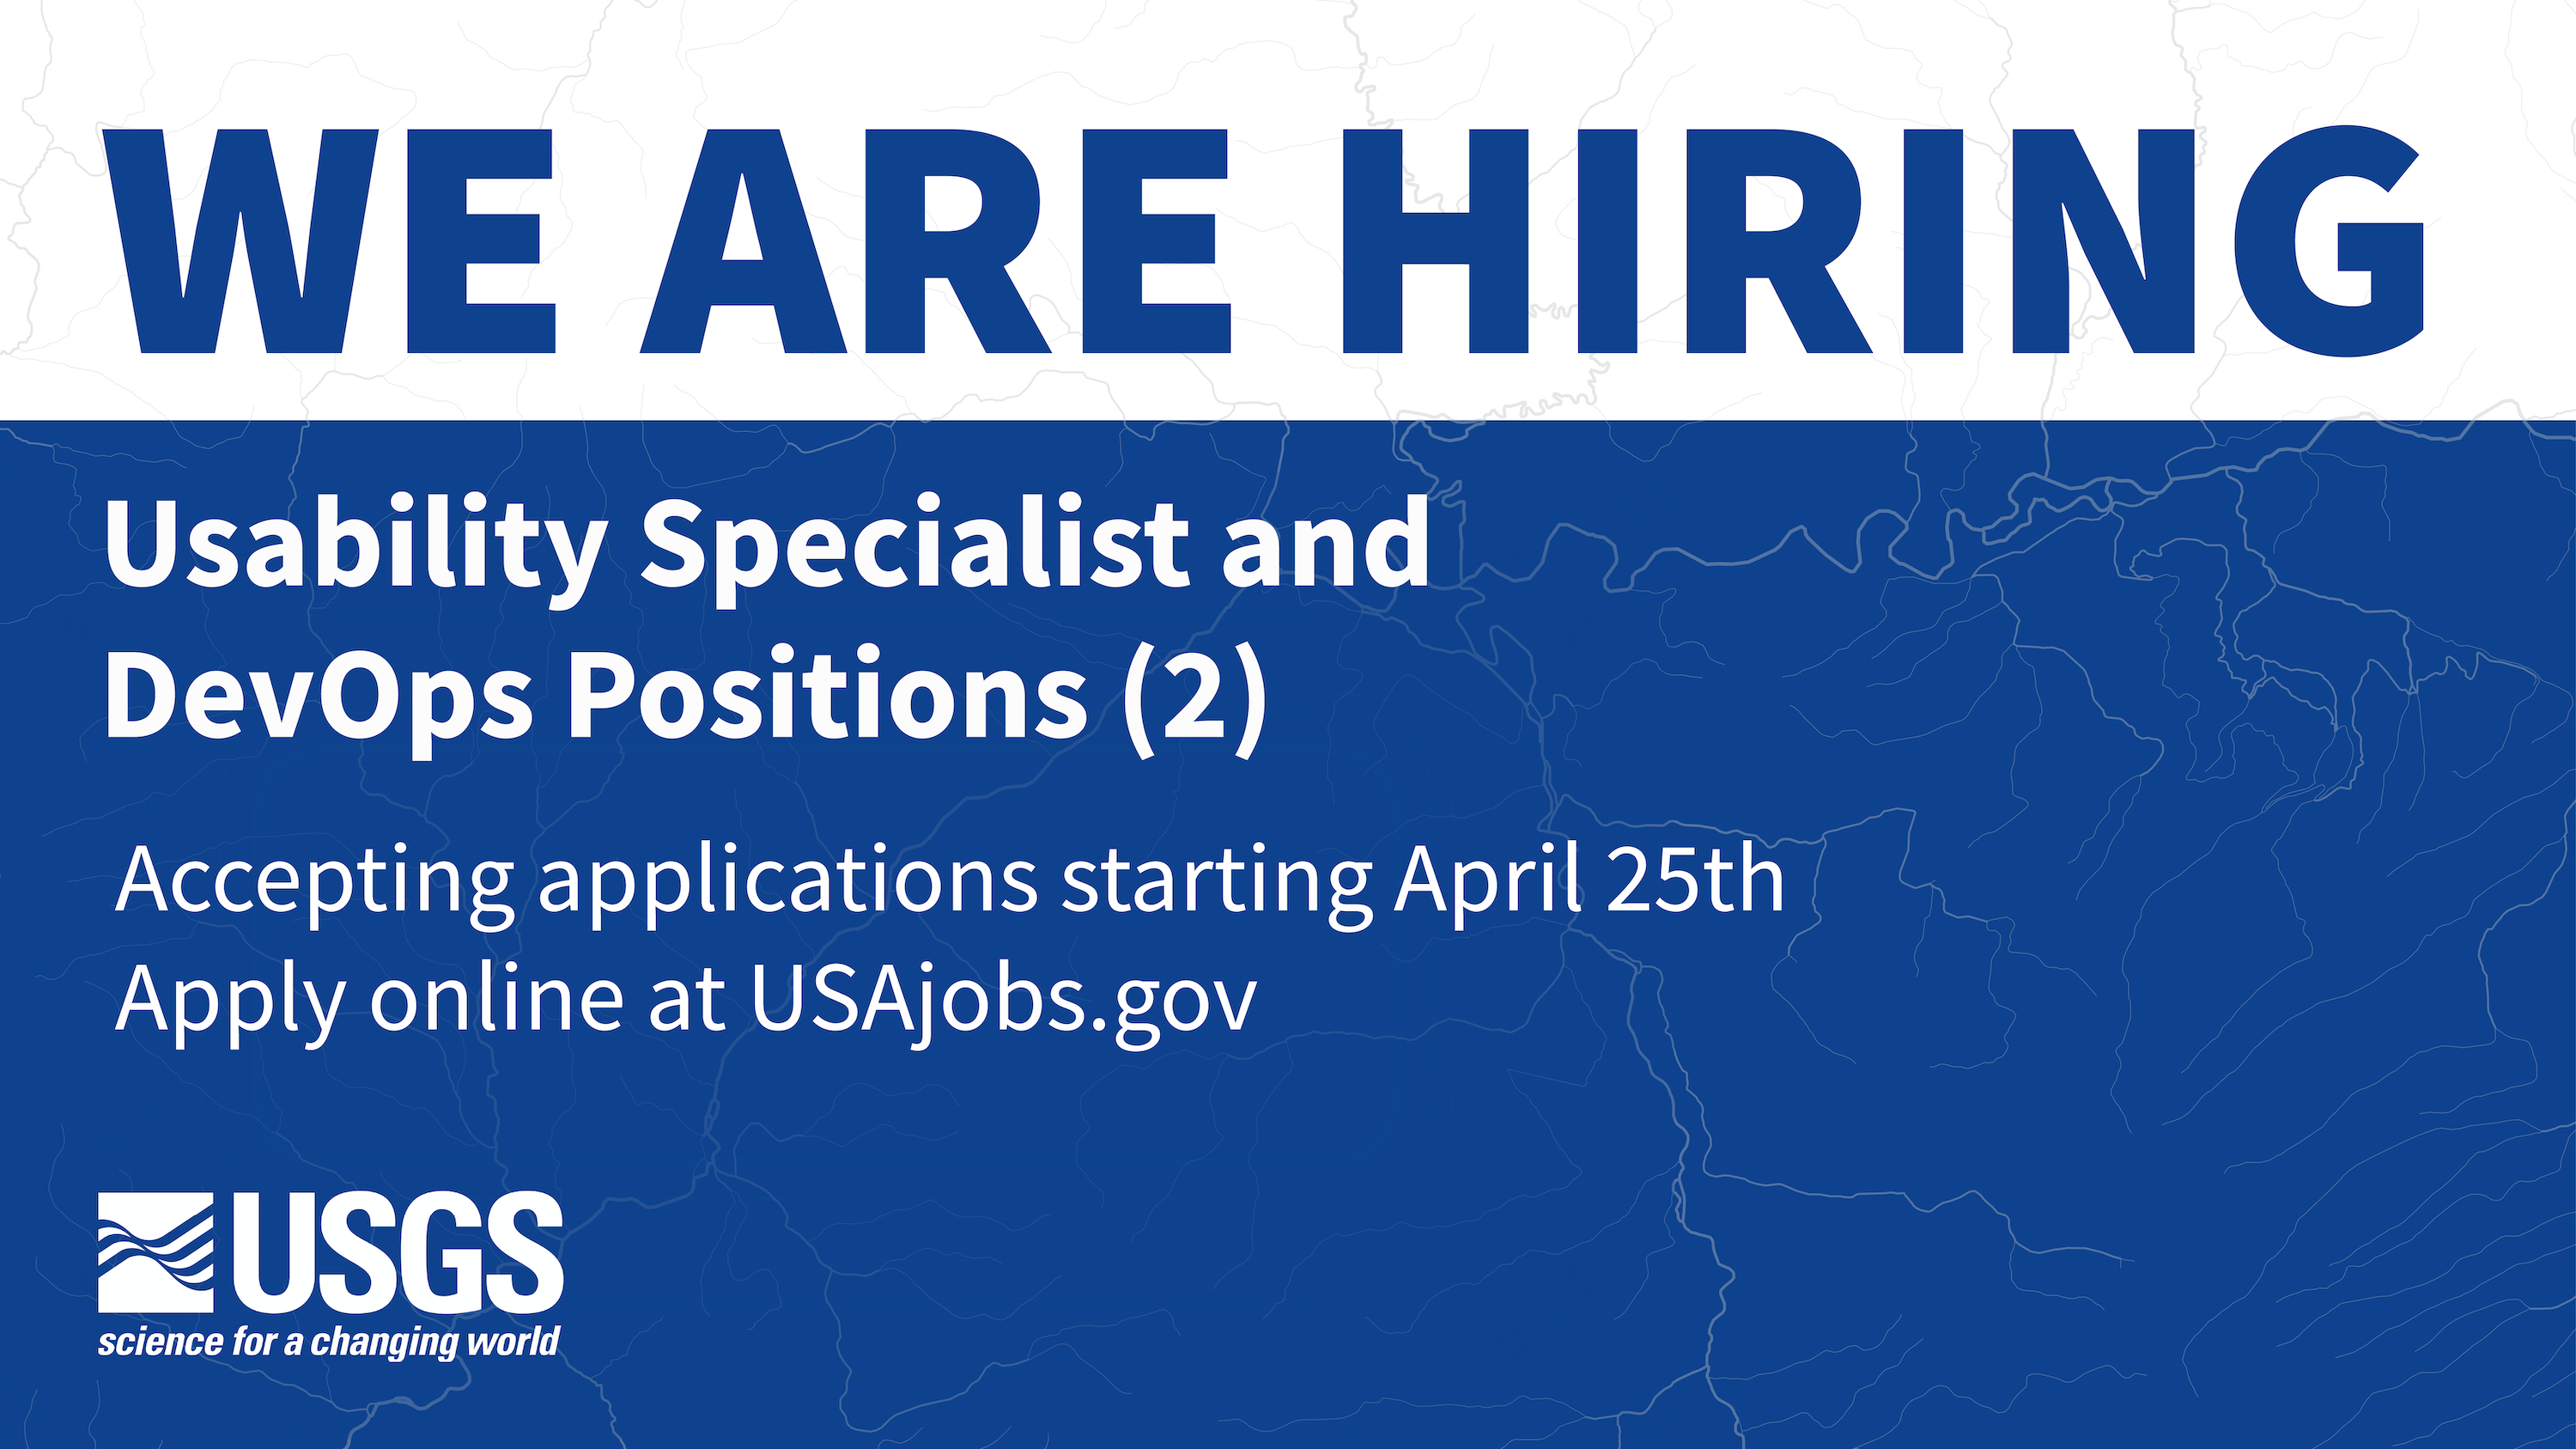 A banner announcing that the USGS Water Mission Area is hiring for 1 usability specialist and 2 Devops positions. Apply online at USAjobs.gov. Applications open April 25th, 2022